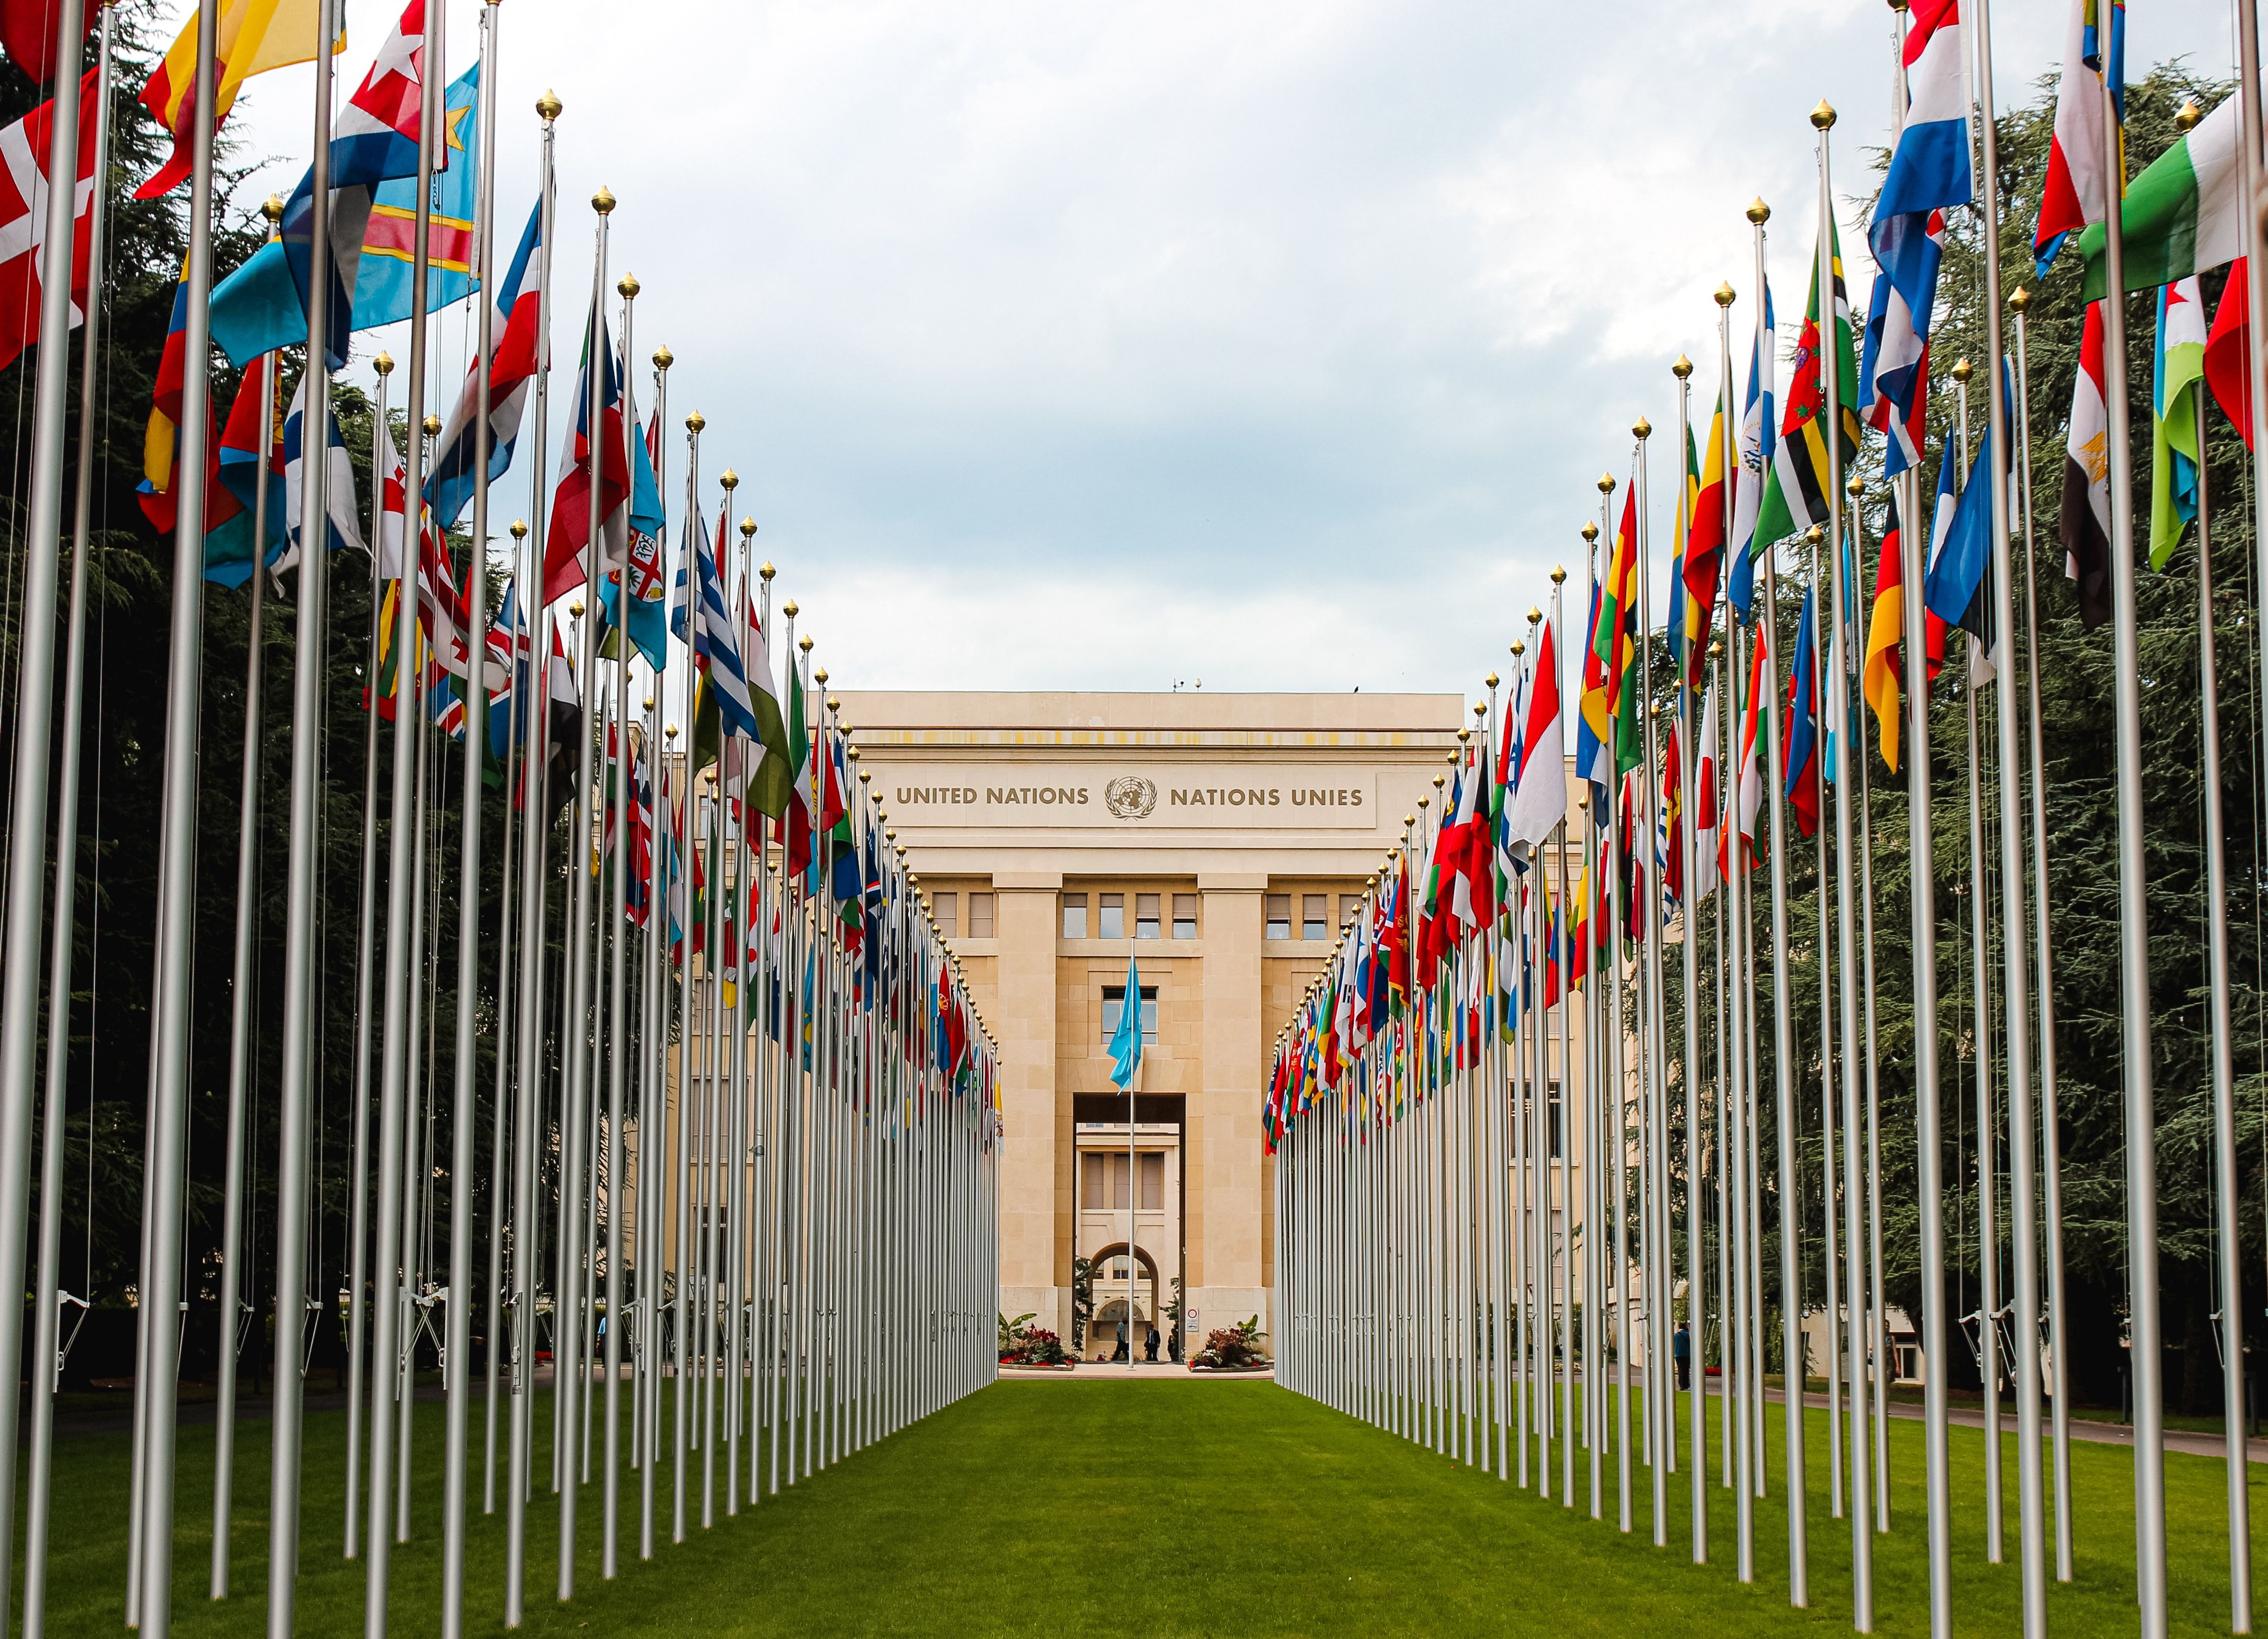 World Heart Summit 2022 to be held in Geneva—the heart of global health diplomacy